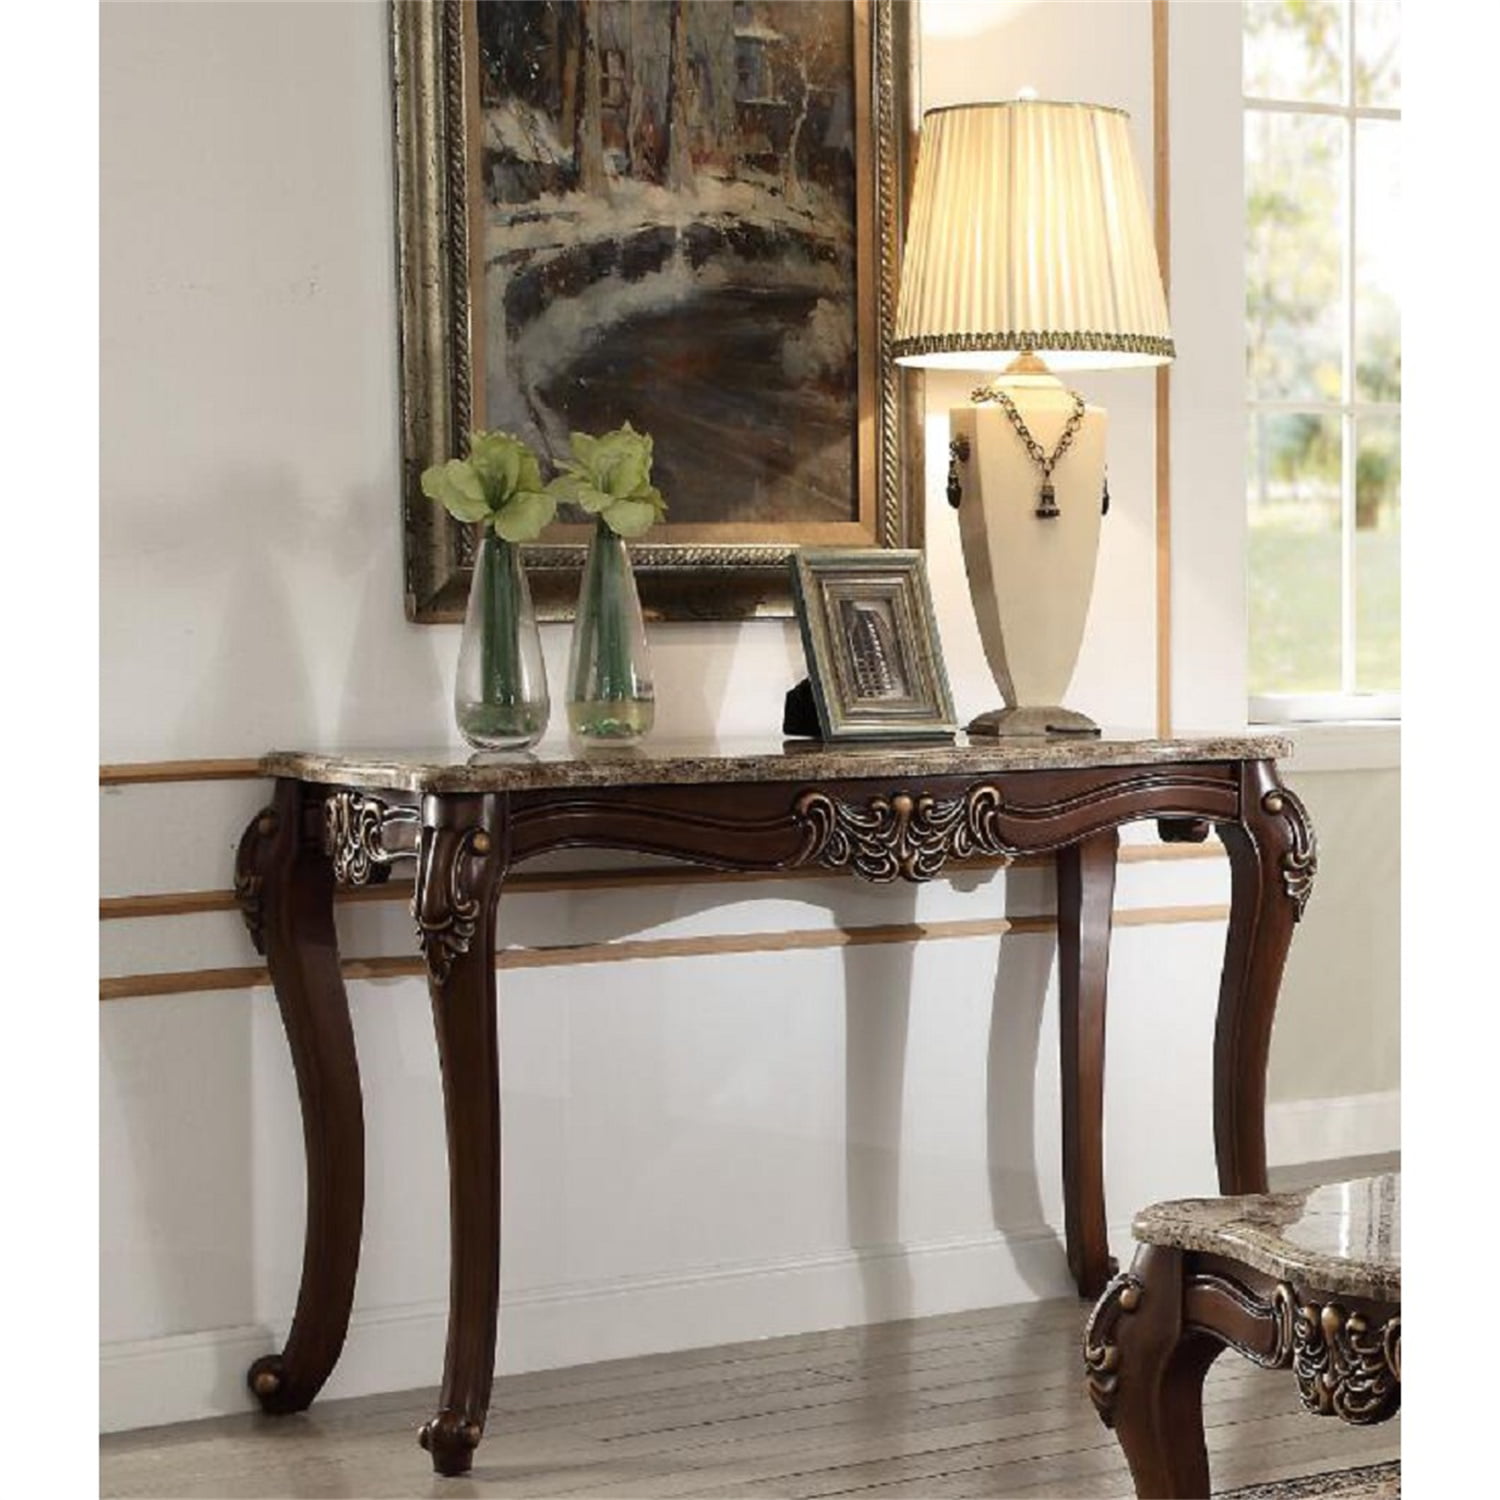 Verbeteren Vergadering paniek 56 Inch Antique Console Table Sideboard with Scalloped Marble Top &  Scalloped Apron & Wooden Queen Anne Legs, Accent Sofa Table for Entryway,  Living Room, Dining Room, Walnut - Walmart.com